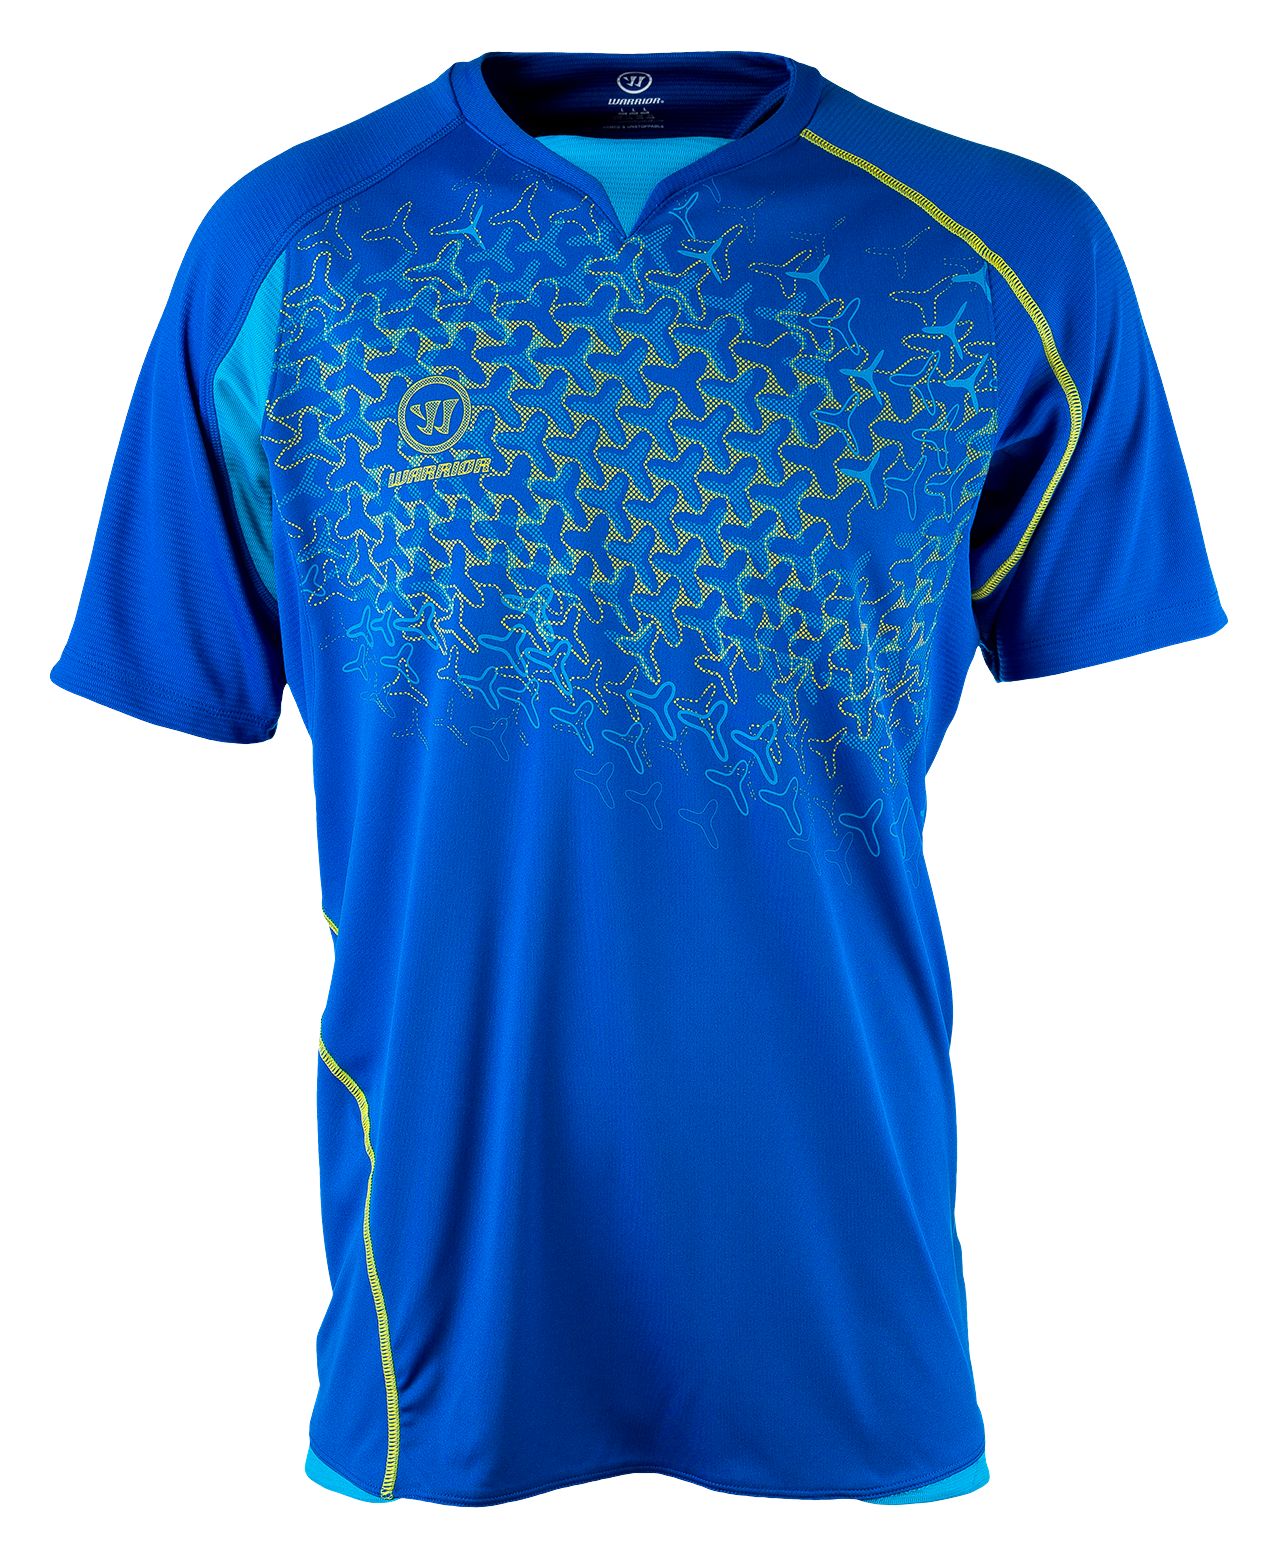 Superheat Training SS Jersey,  image number 1